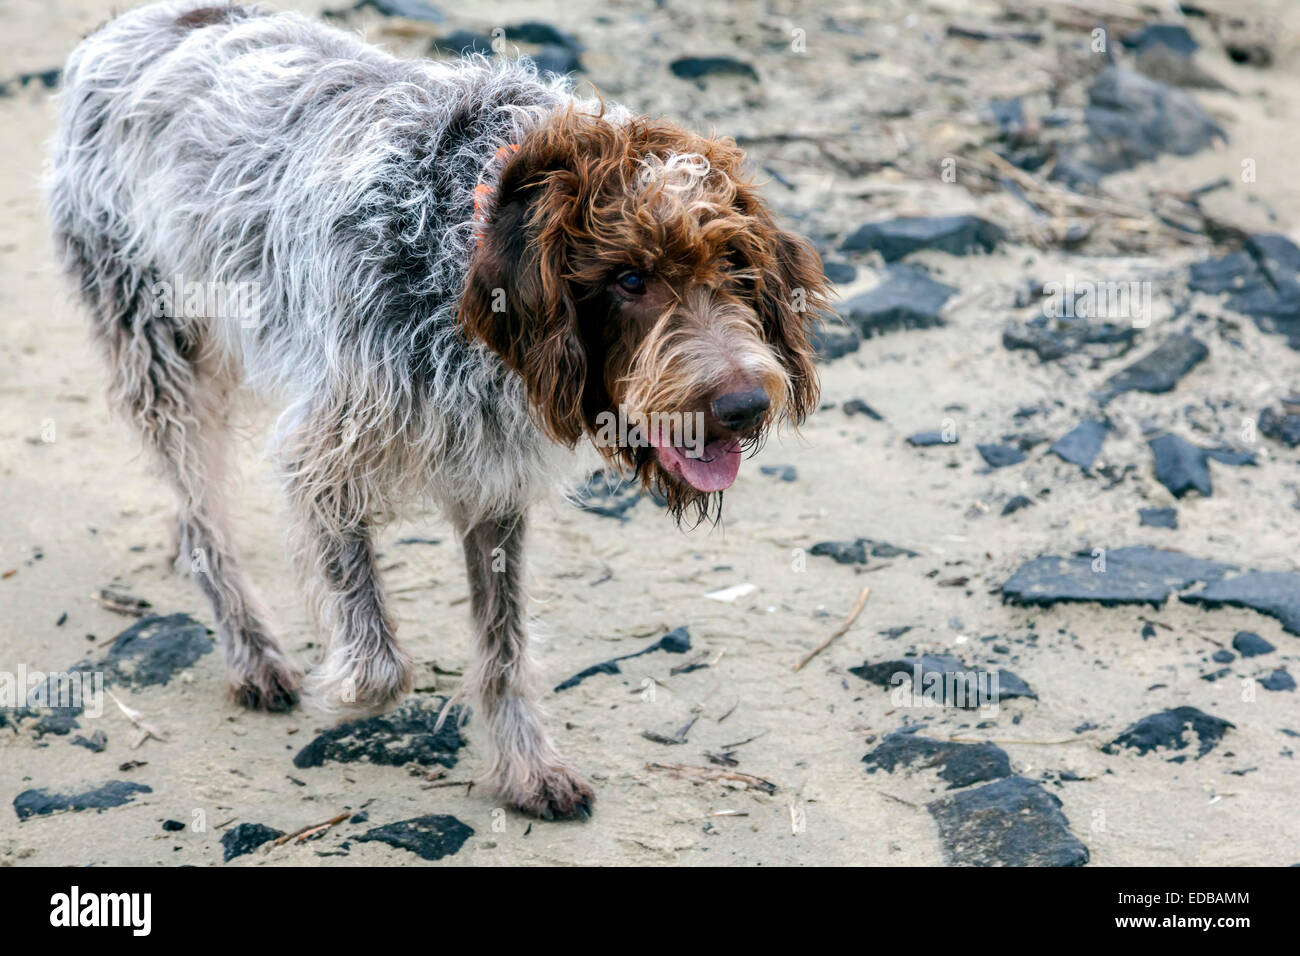 Damp and sandy Wirehaired Pointing Griffon dog a.k.a. Korthals Griffon is a hunter and gundog well-suited to wet locations. Stock Photo